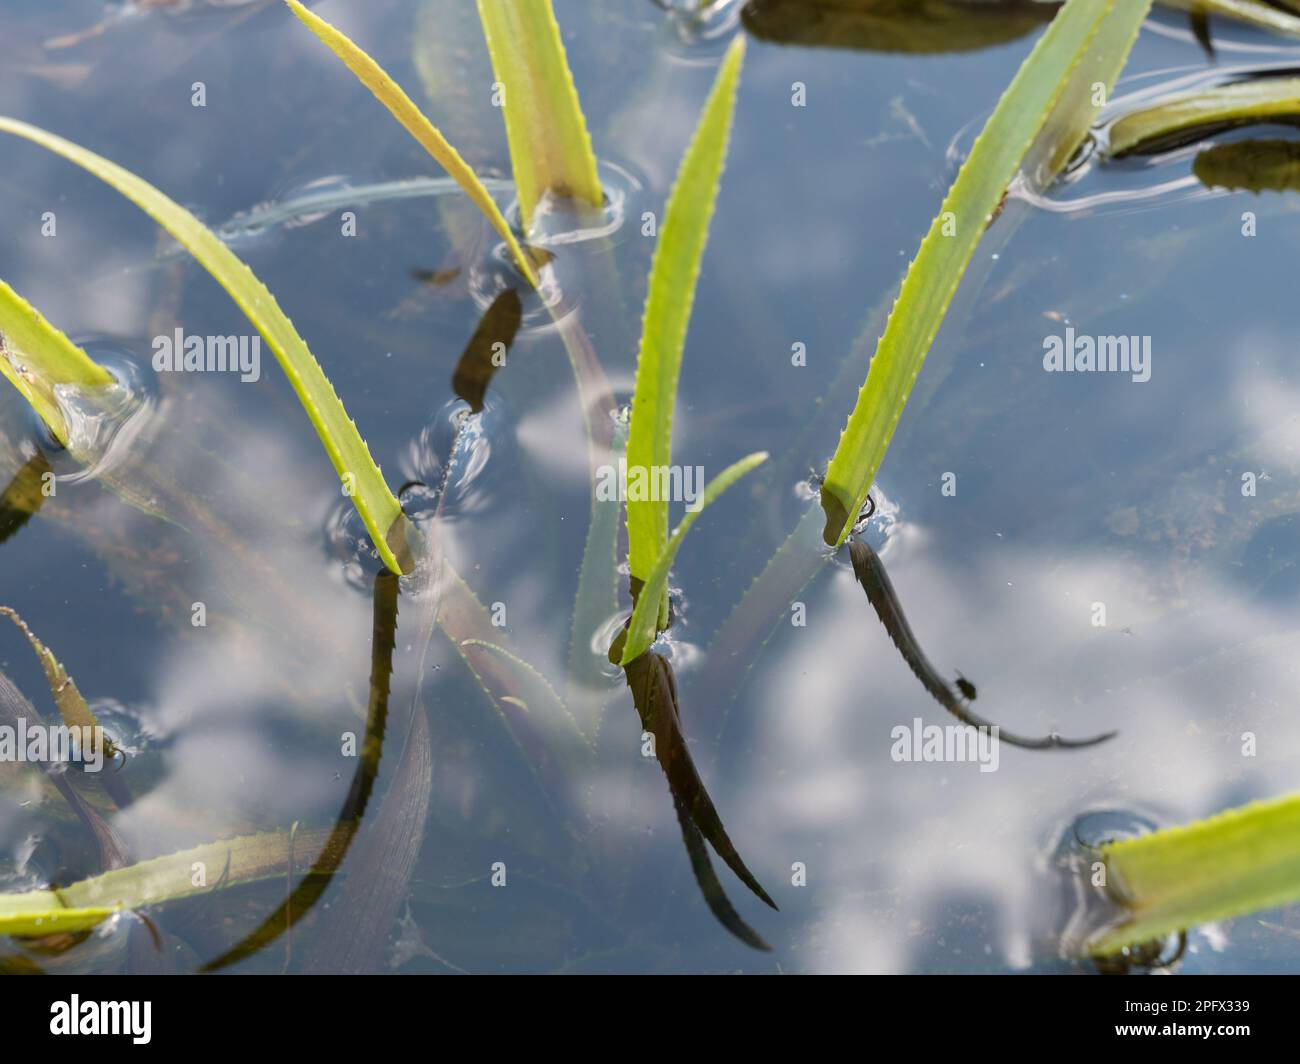 Water sodier aquatic plant leaves over water surface Stock Photo